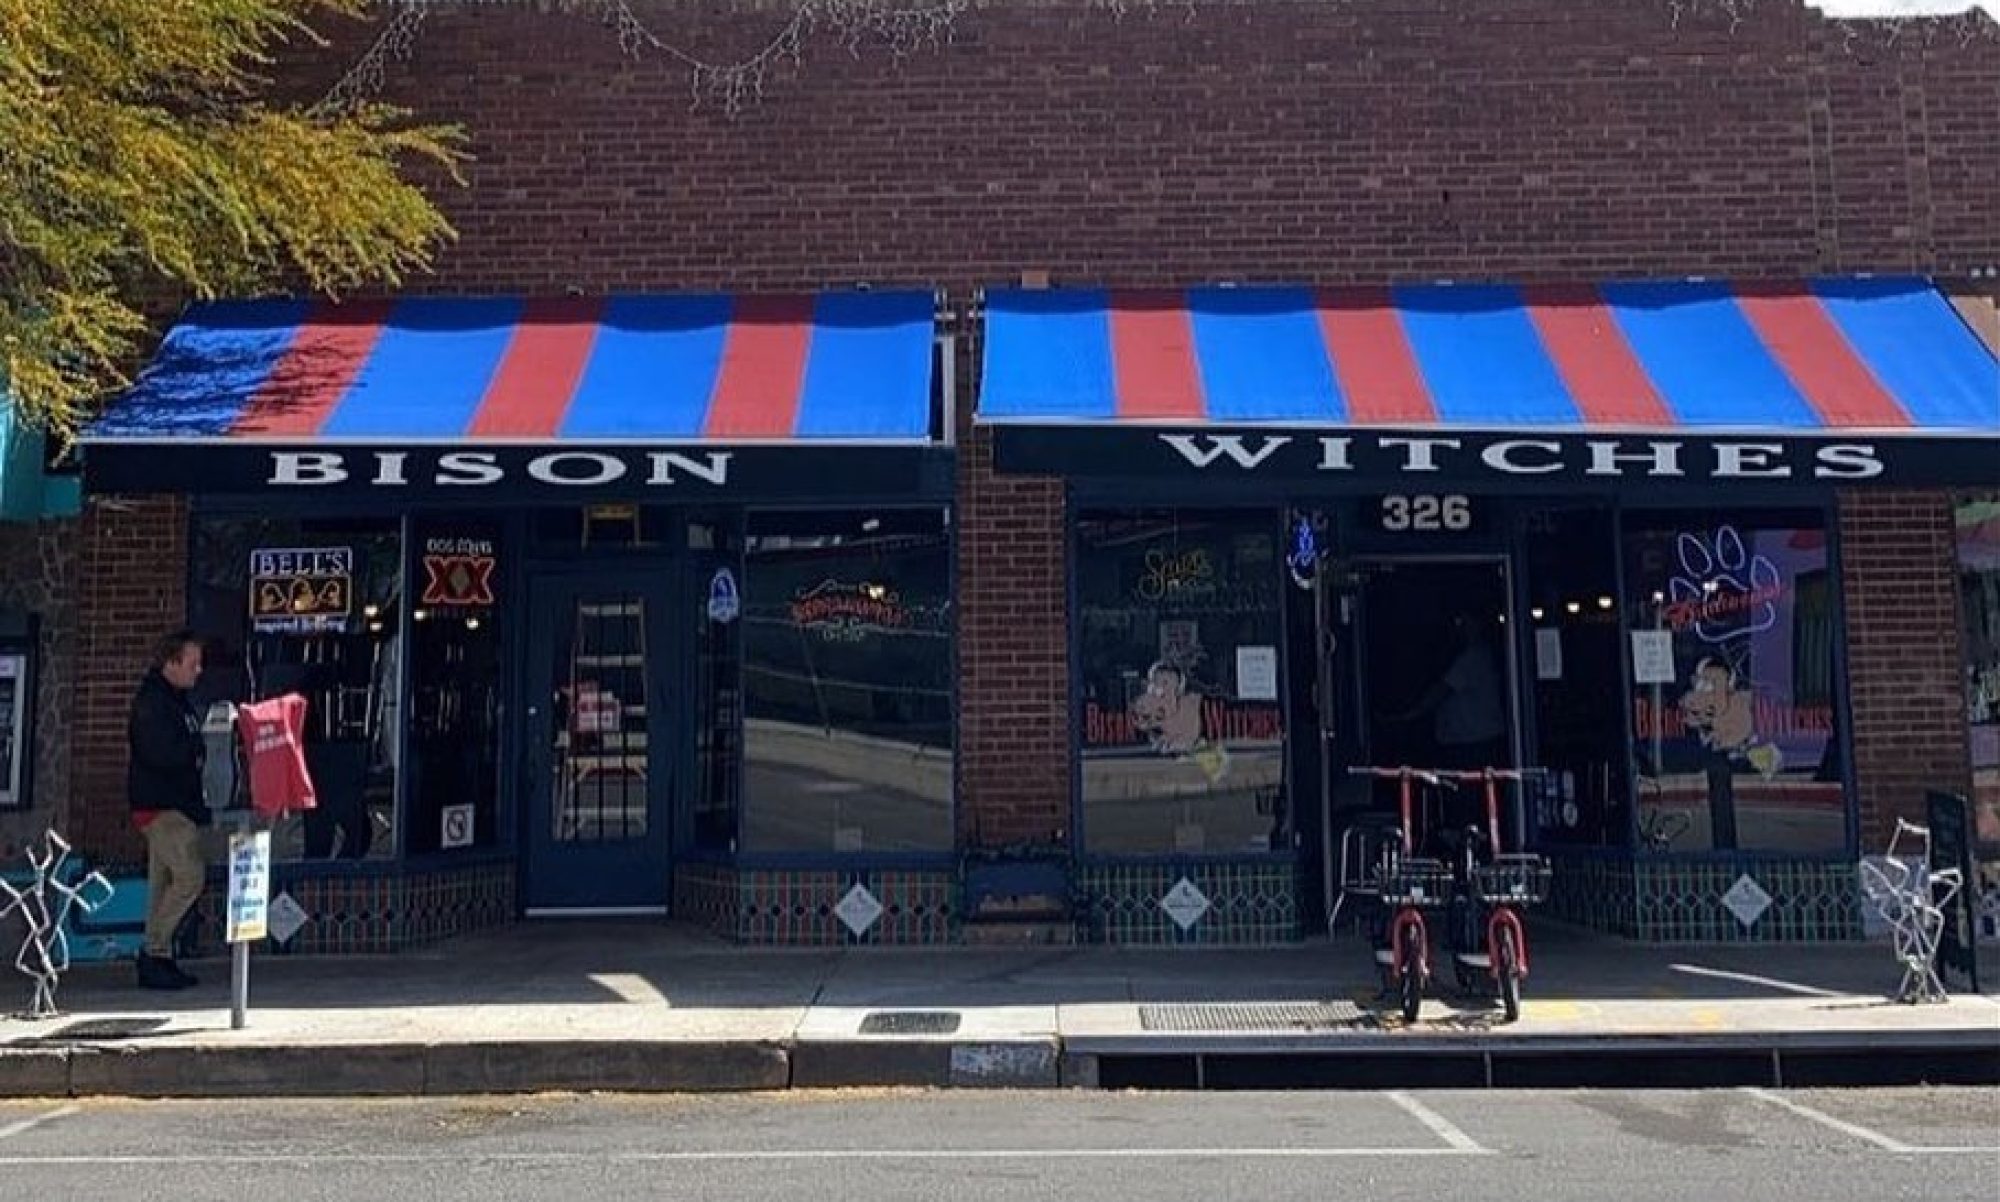 Bison Witches Bar & Deli from the street